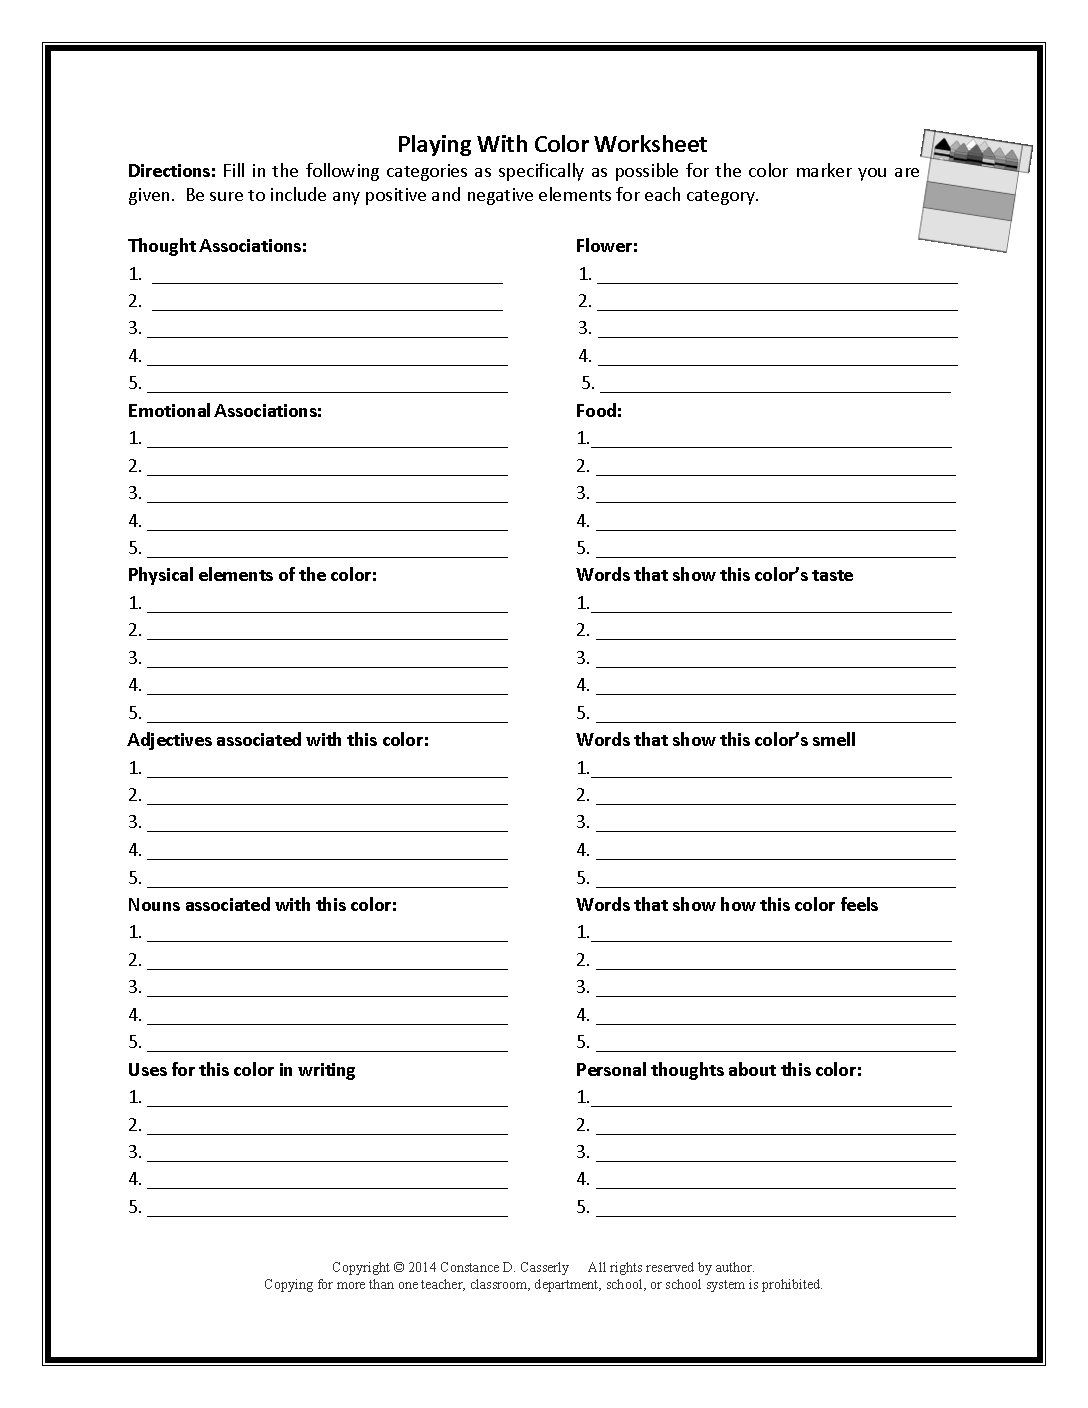 16-best-images-of-9th-grade-reading-worksheets-9th-grade-reading